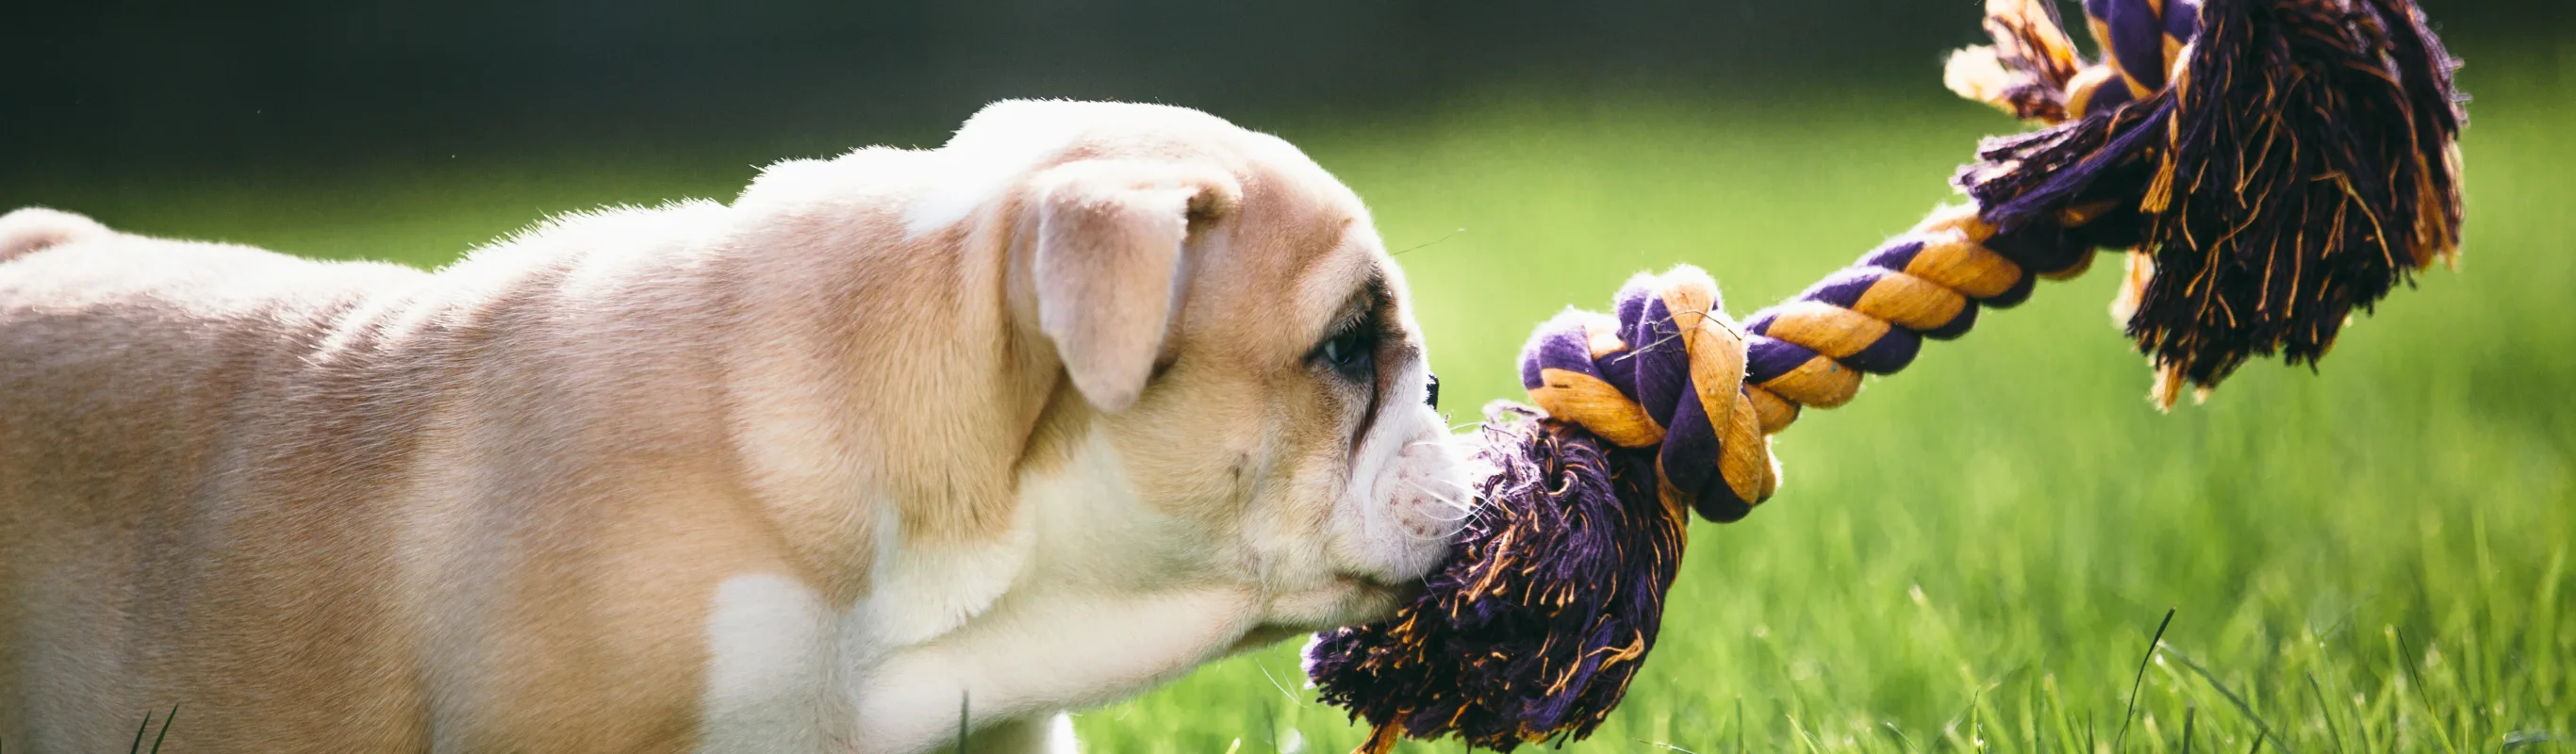 A dog on the grass biting a rope toy